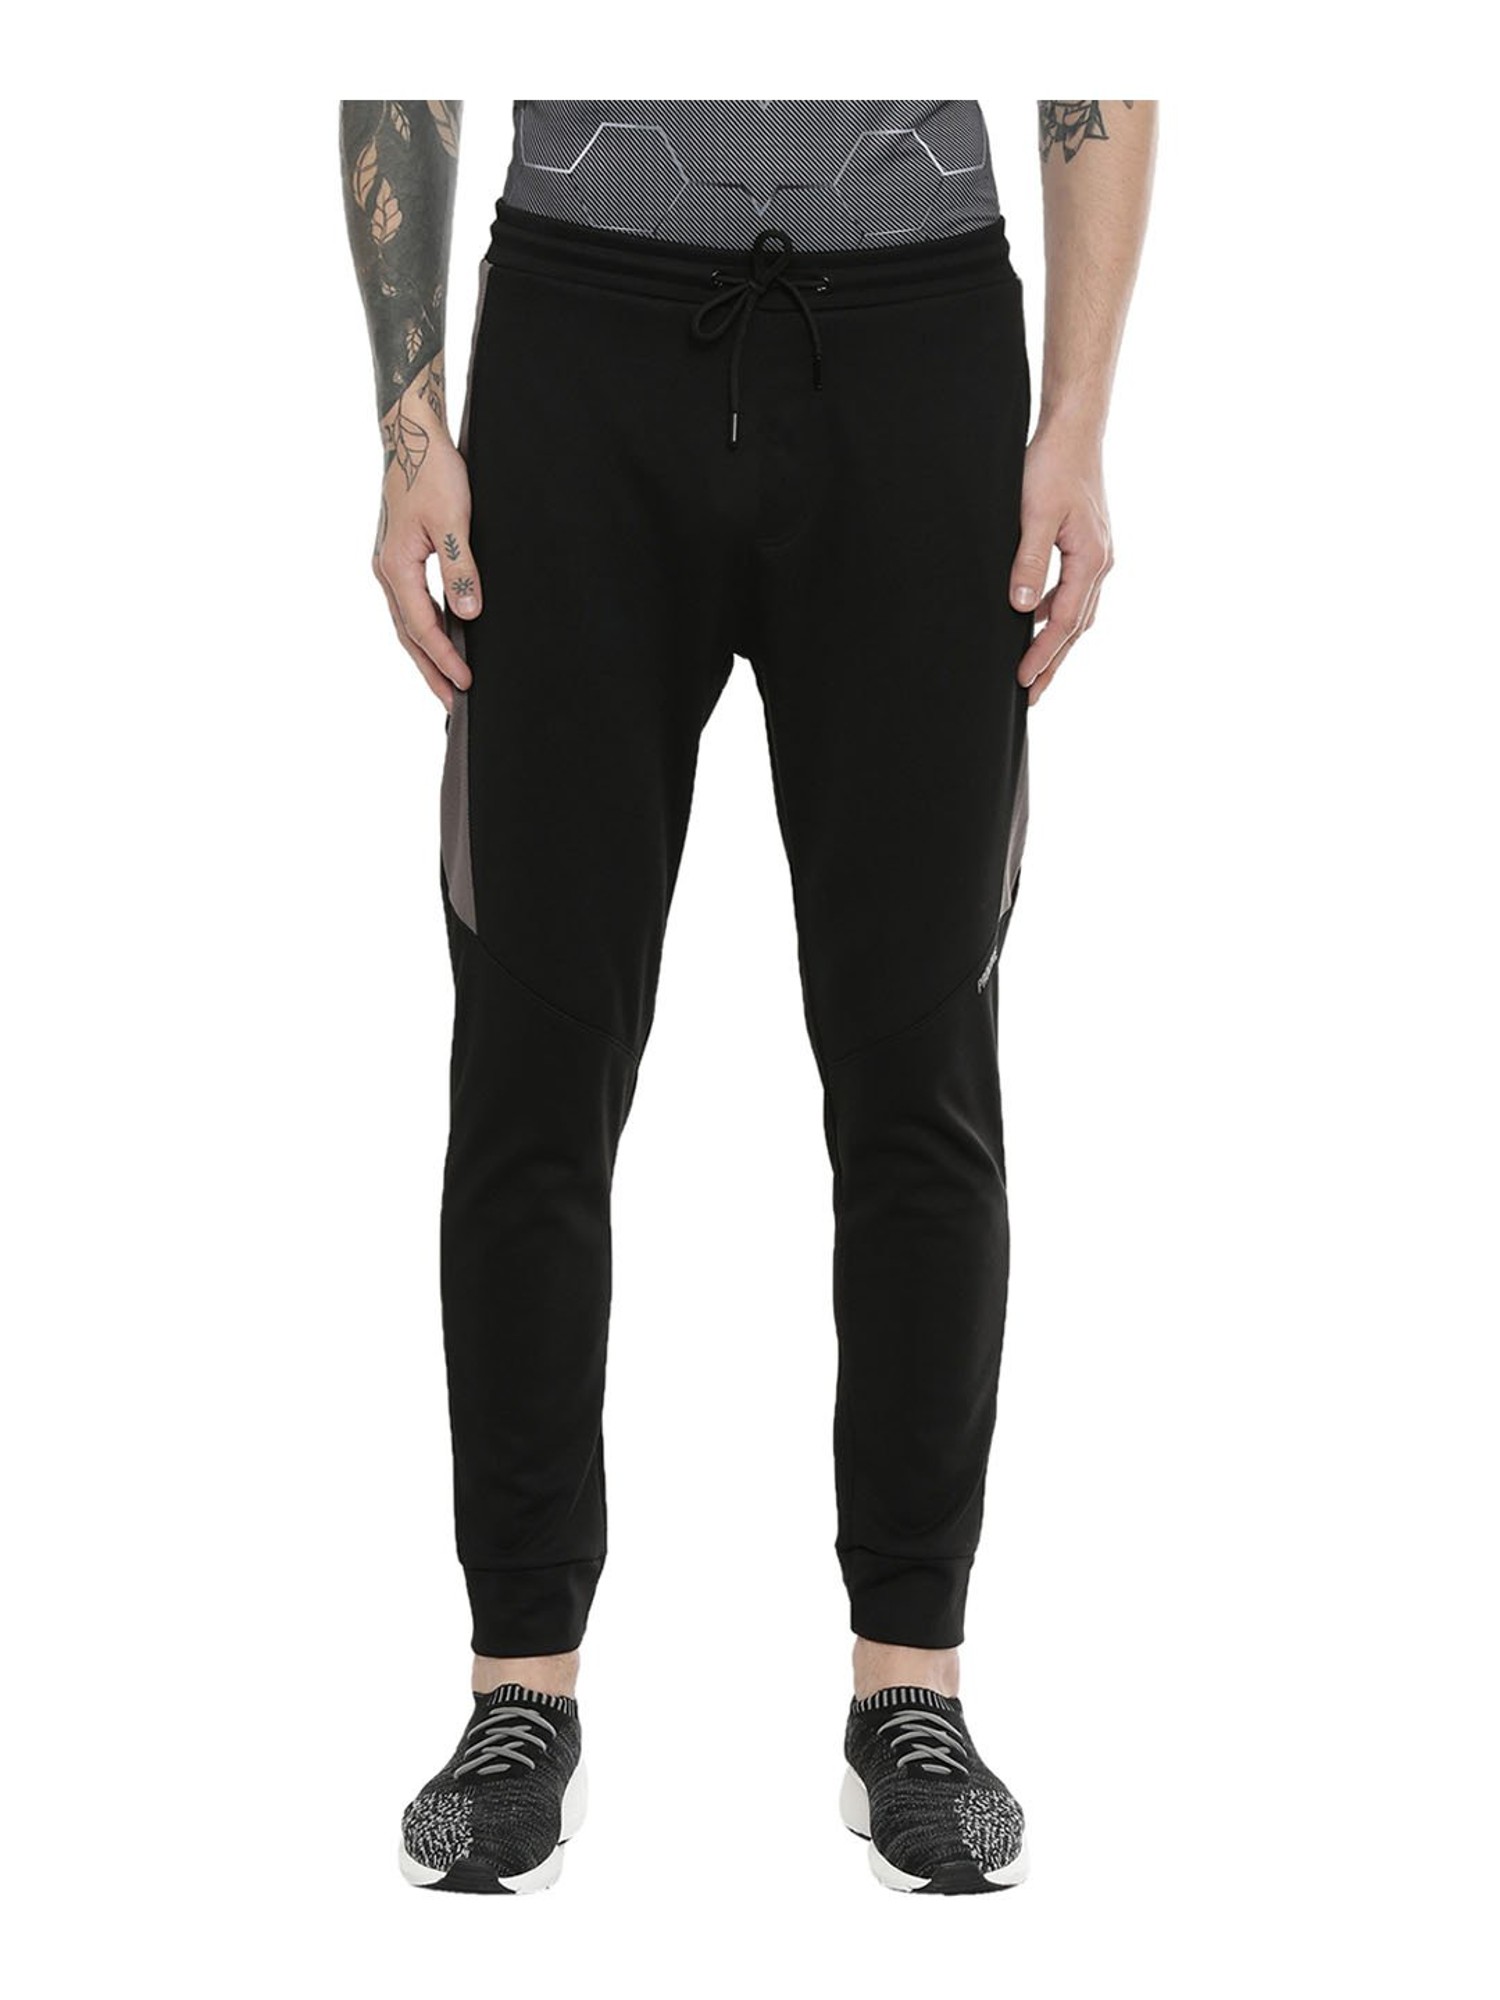 Nike Track Pants  Get Nike TrackPants Online at Discounted Price Myntra